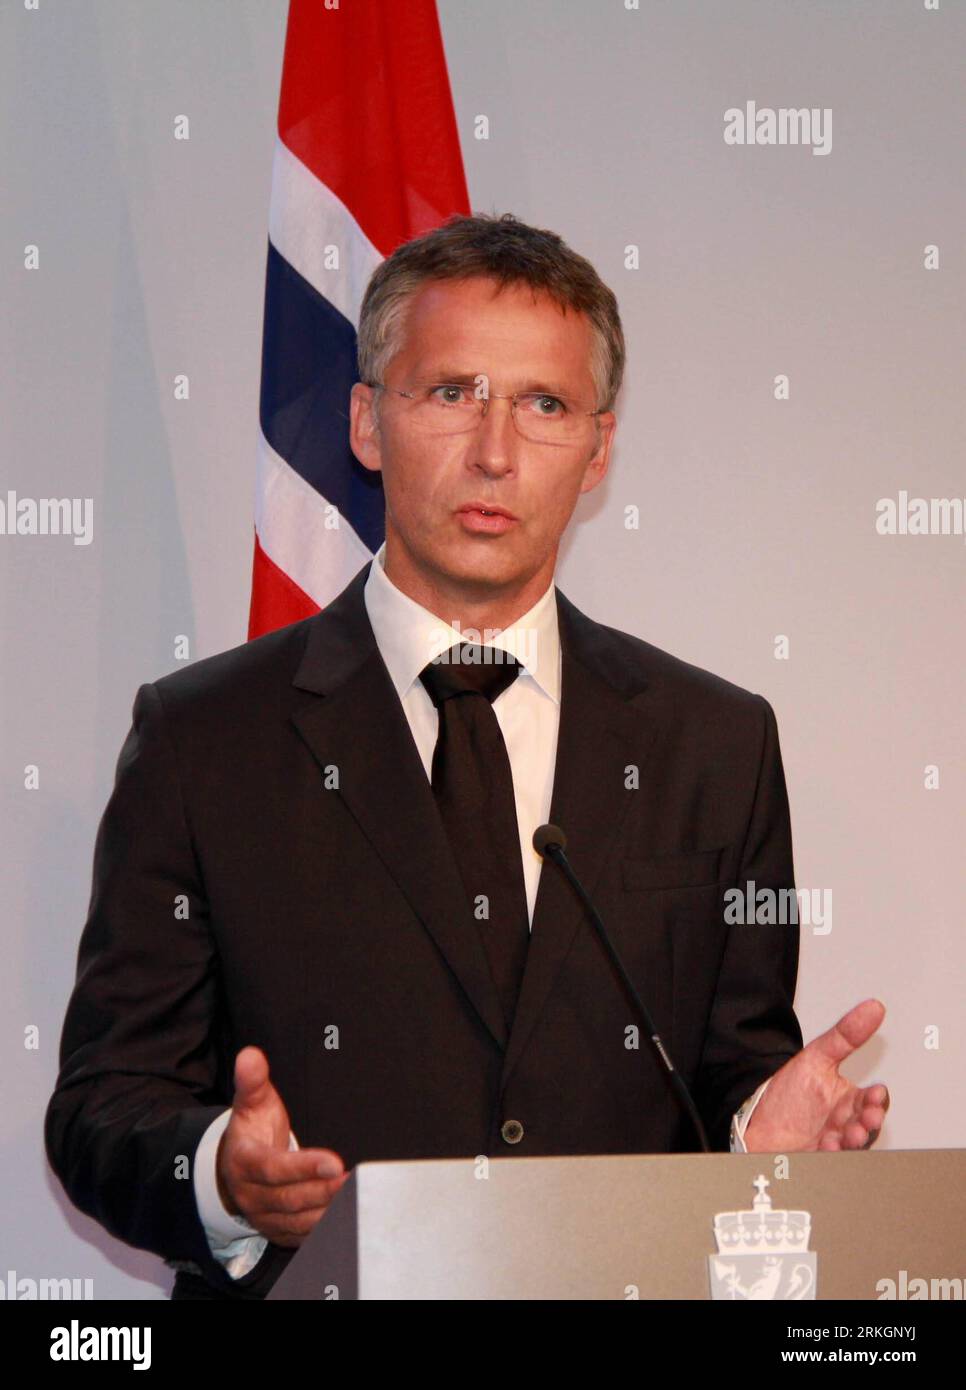 Bildnummer: 55610626  Datum: 23.07.2011  Copyright: imago/Xinhua (110723) -- OSLO, July 23, 2011 (Xinhua) -- Norwegian Prime Minister Jens Stoltenberg speaks at a press conference in Oslo, Norway, July 23, 2011. The death toll rose to 84 in the shootingspree Friday at a youth camp on the island of Utoeya, some 40 kilometers west of Oslo, police said on Saturday. (Xinhua/Liu Min)(axy) NORWAY-OSLO-PRIME MINISTER-PRESS PUBLICATIONxNOTxINxCHN Gesellschaft Norwegen Oslo Anschlag Terror Terroranschlag Bombenanschlag Regierungsviertel Amok Ferienlager Jugendlager Zeltlager Utoya People Politik xng 20 Stock Photo